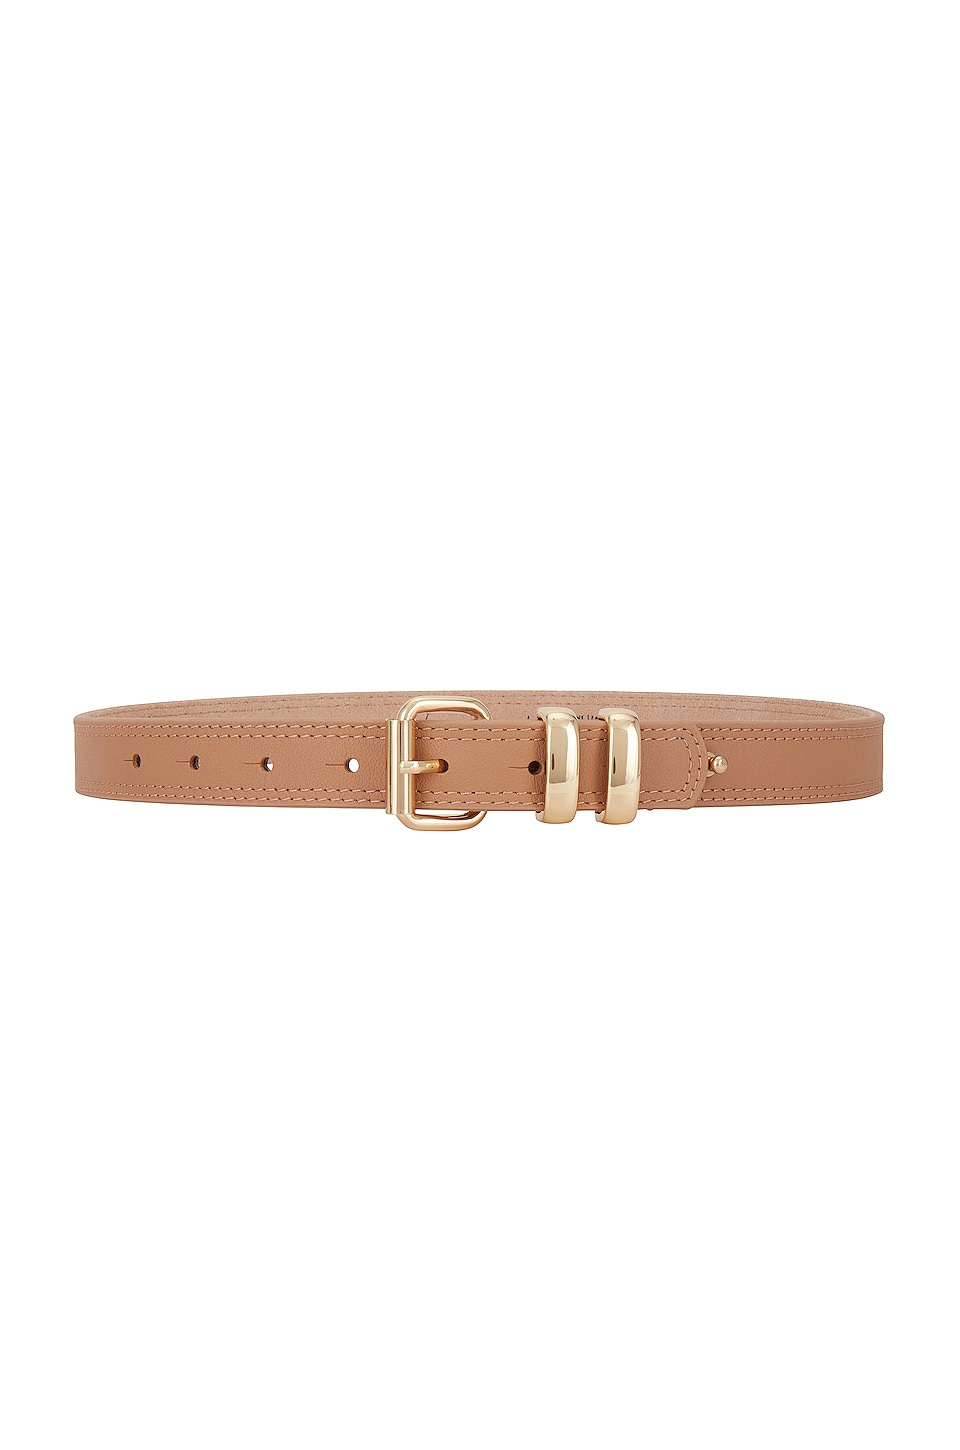 Image 1 of Classic Belt in Ruby Tan